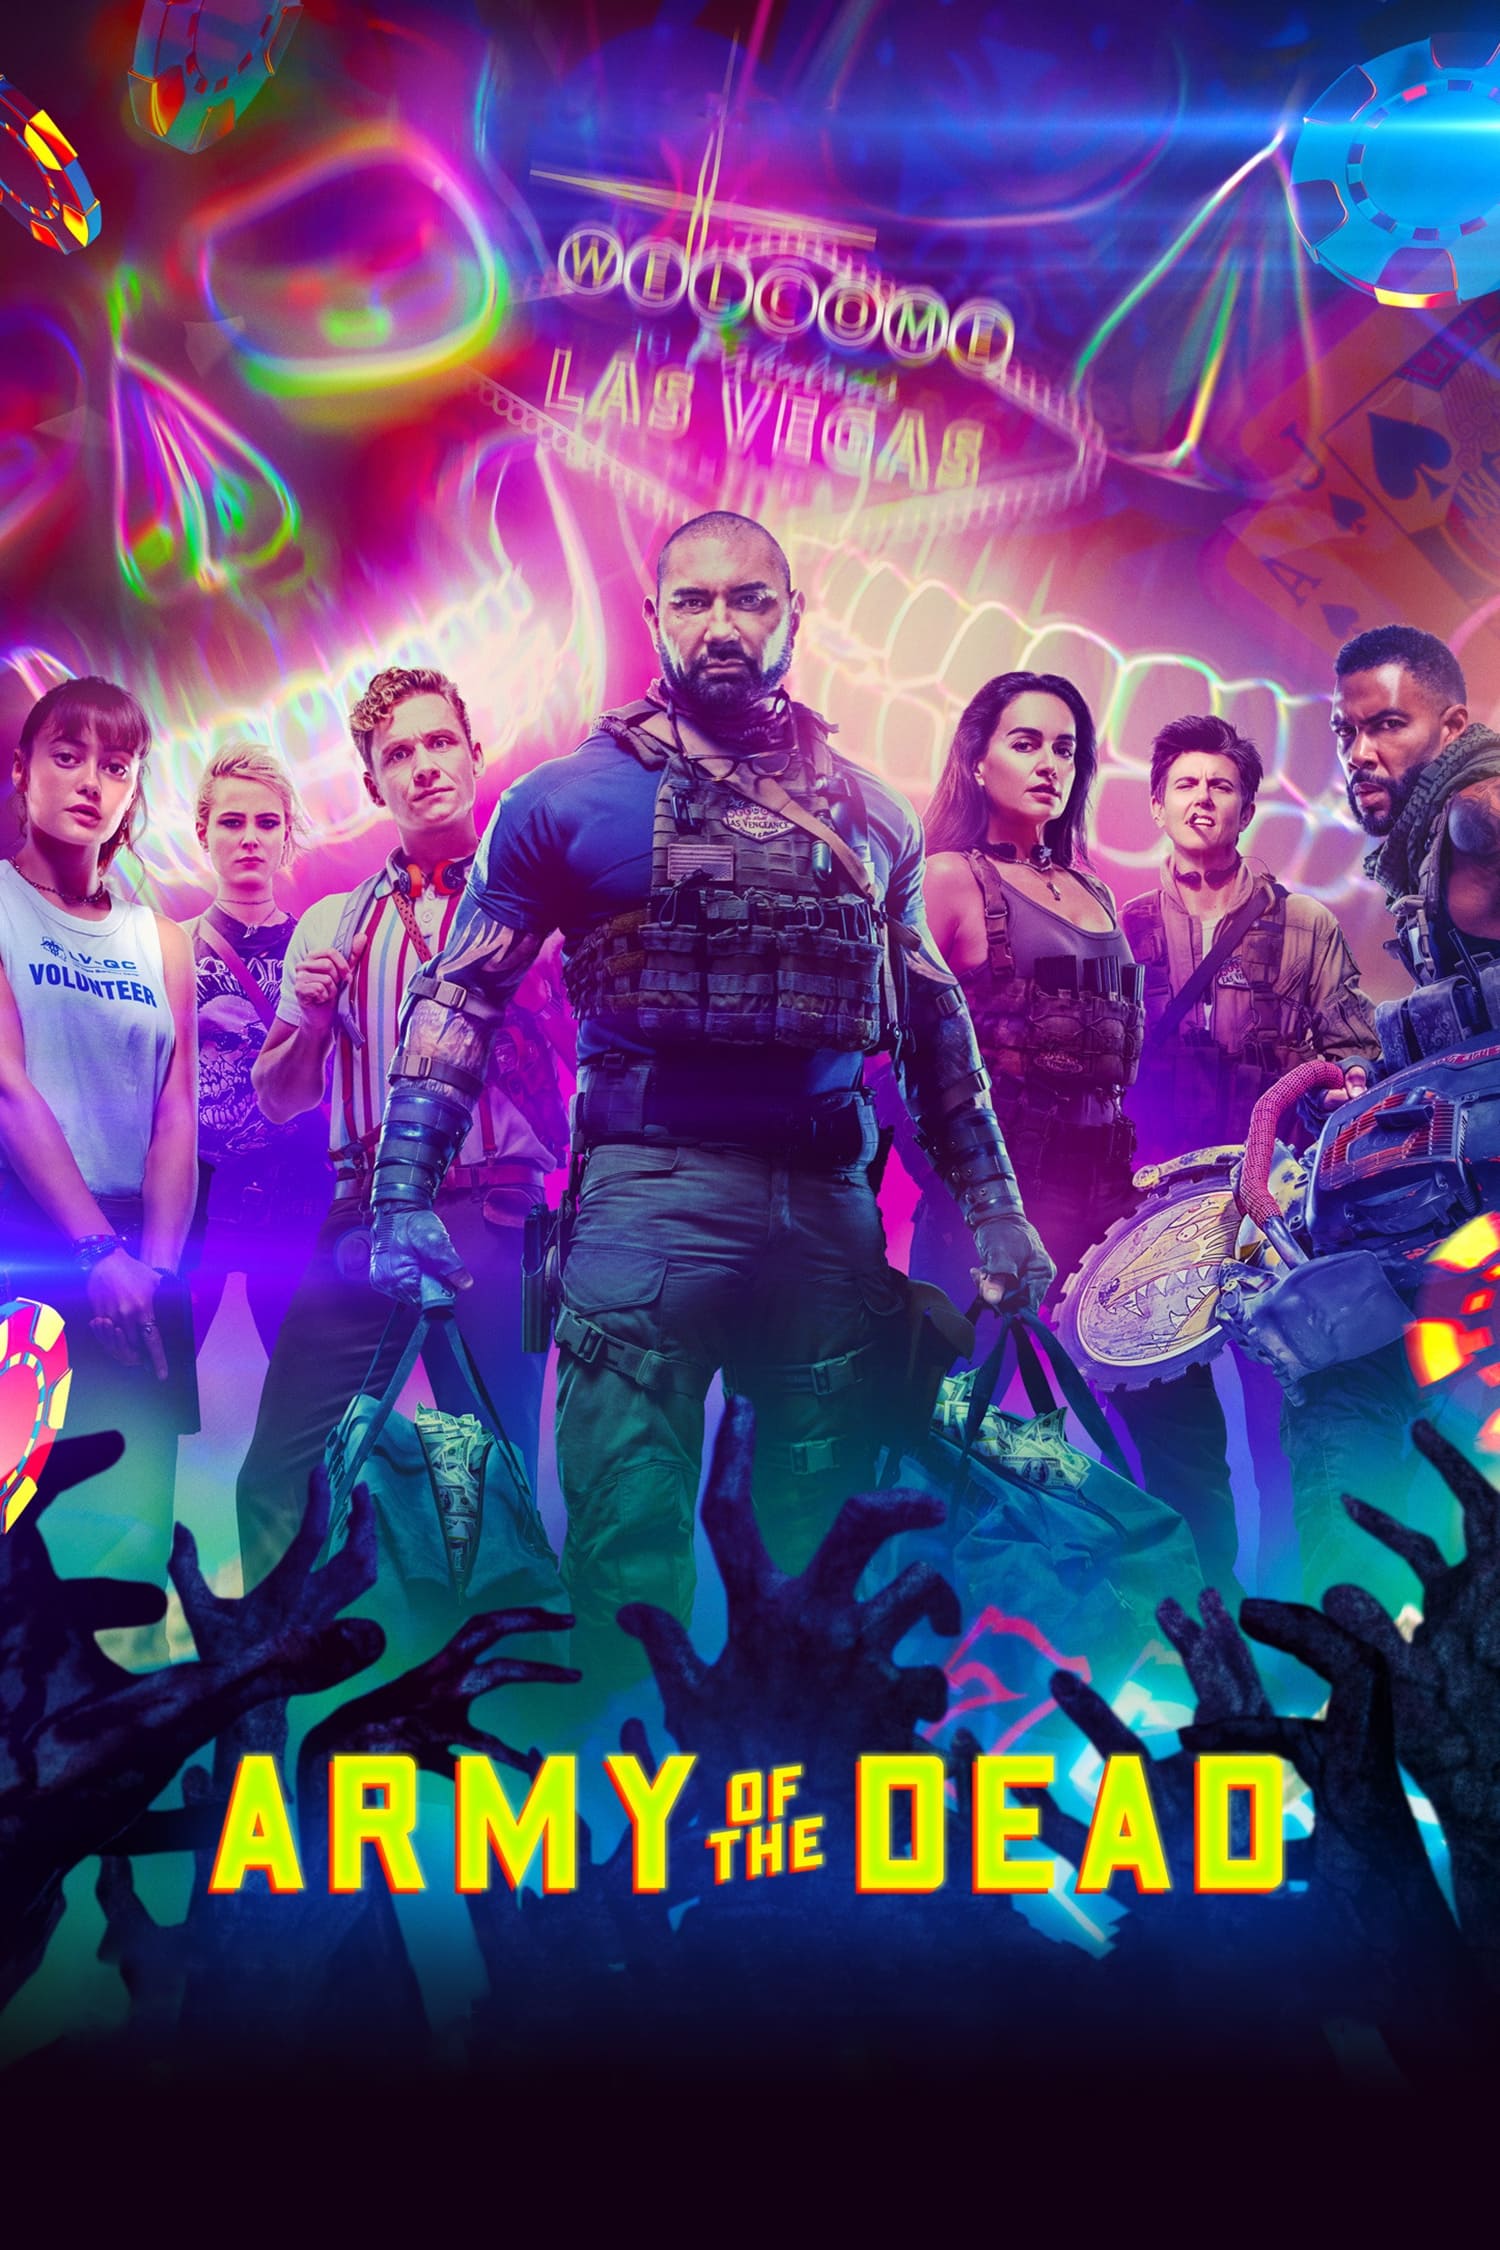 Army of the Dead 2021 full Movie Download In Hindi English 1080p 720p